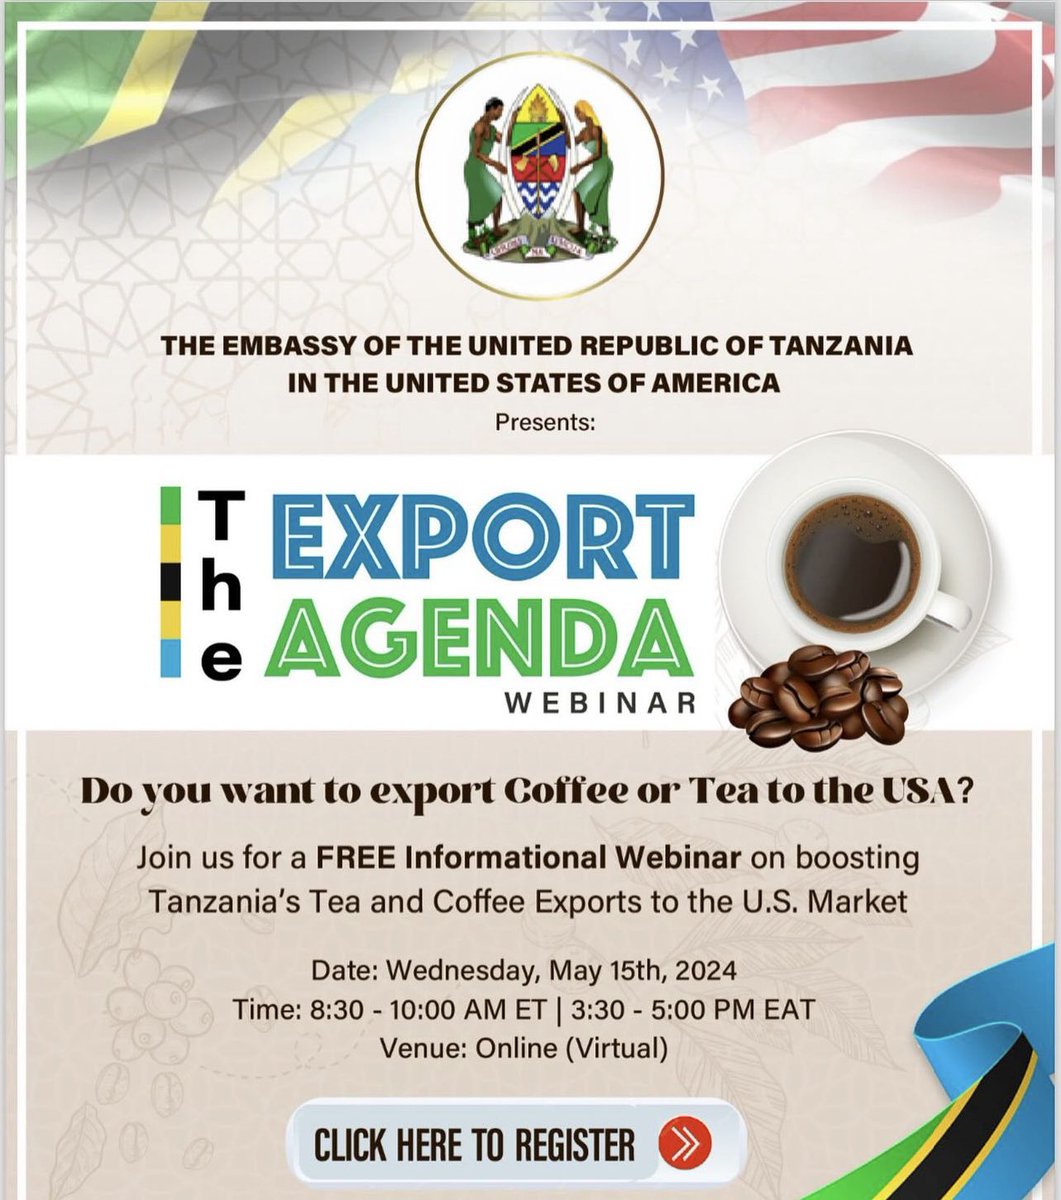 Don't miss out! Register now for an exclusive webinar on exporting tea and coffee from Tanzania to the USA, organized by the Tanzania Embassy in the USA.

Webinar details:

- Date: May 15th, 2024
- Registration link: us06web.zoom.us/meeting/regist…